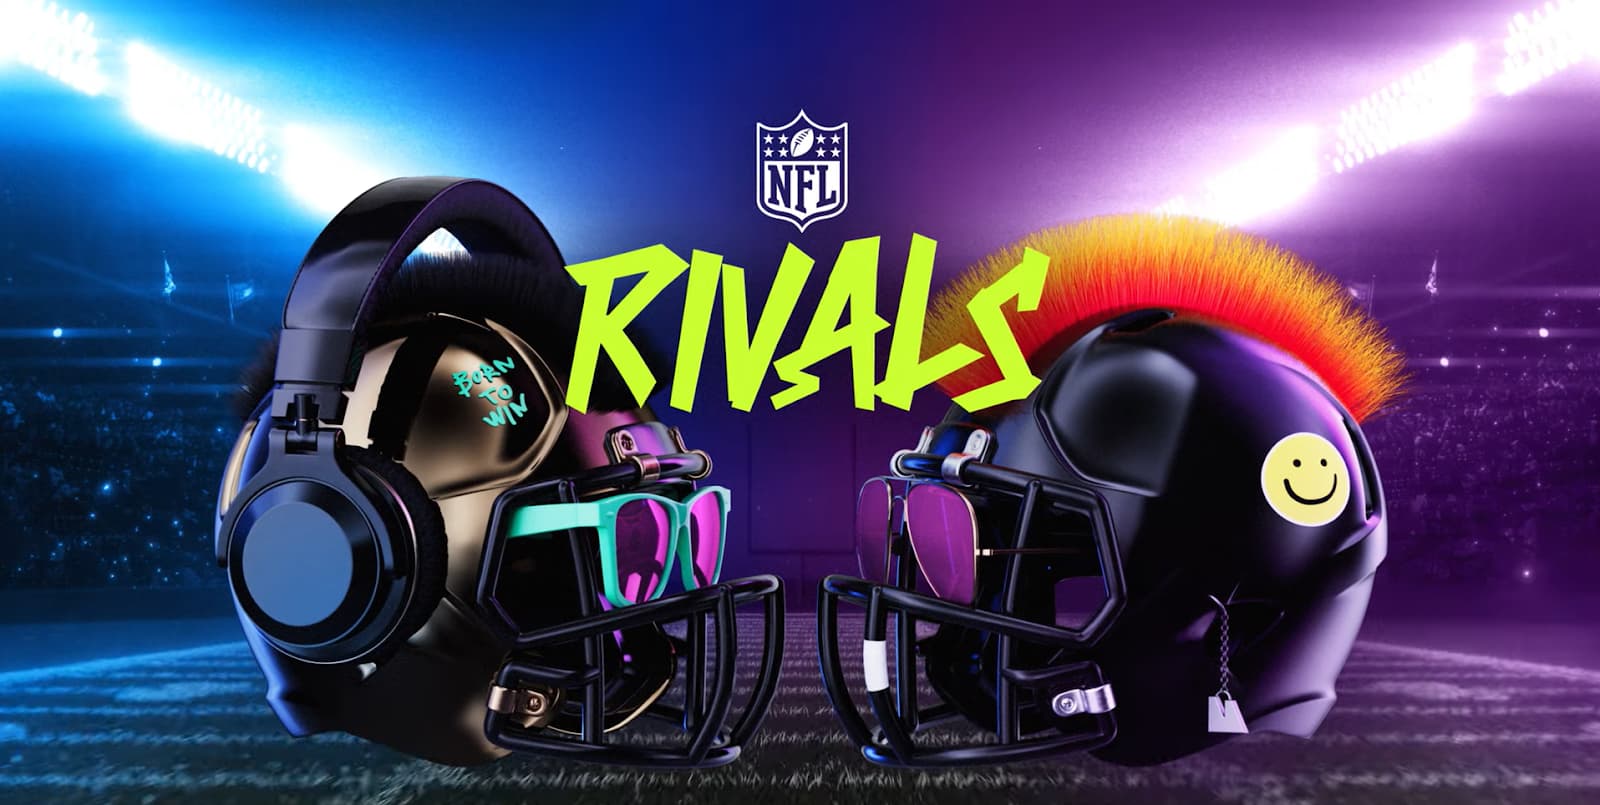 Stylized NFL helmets paired with headphones, representing a "Rivals" theme